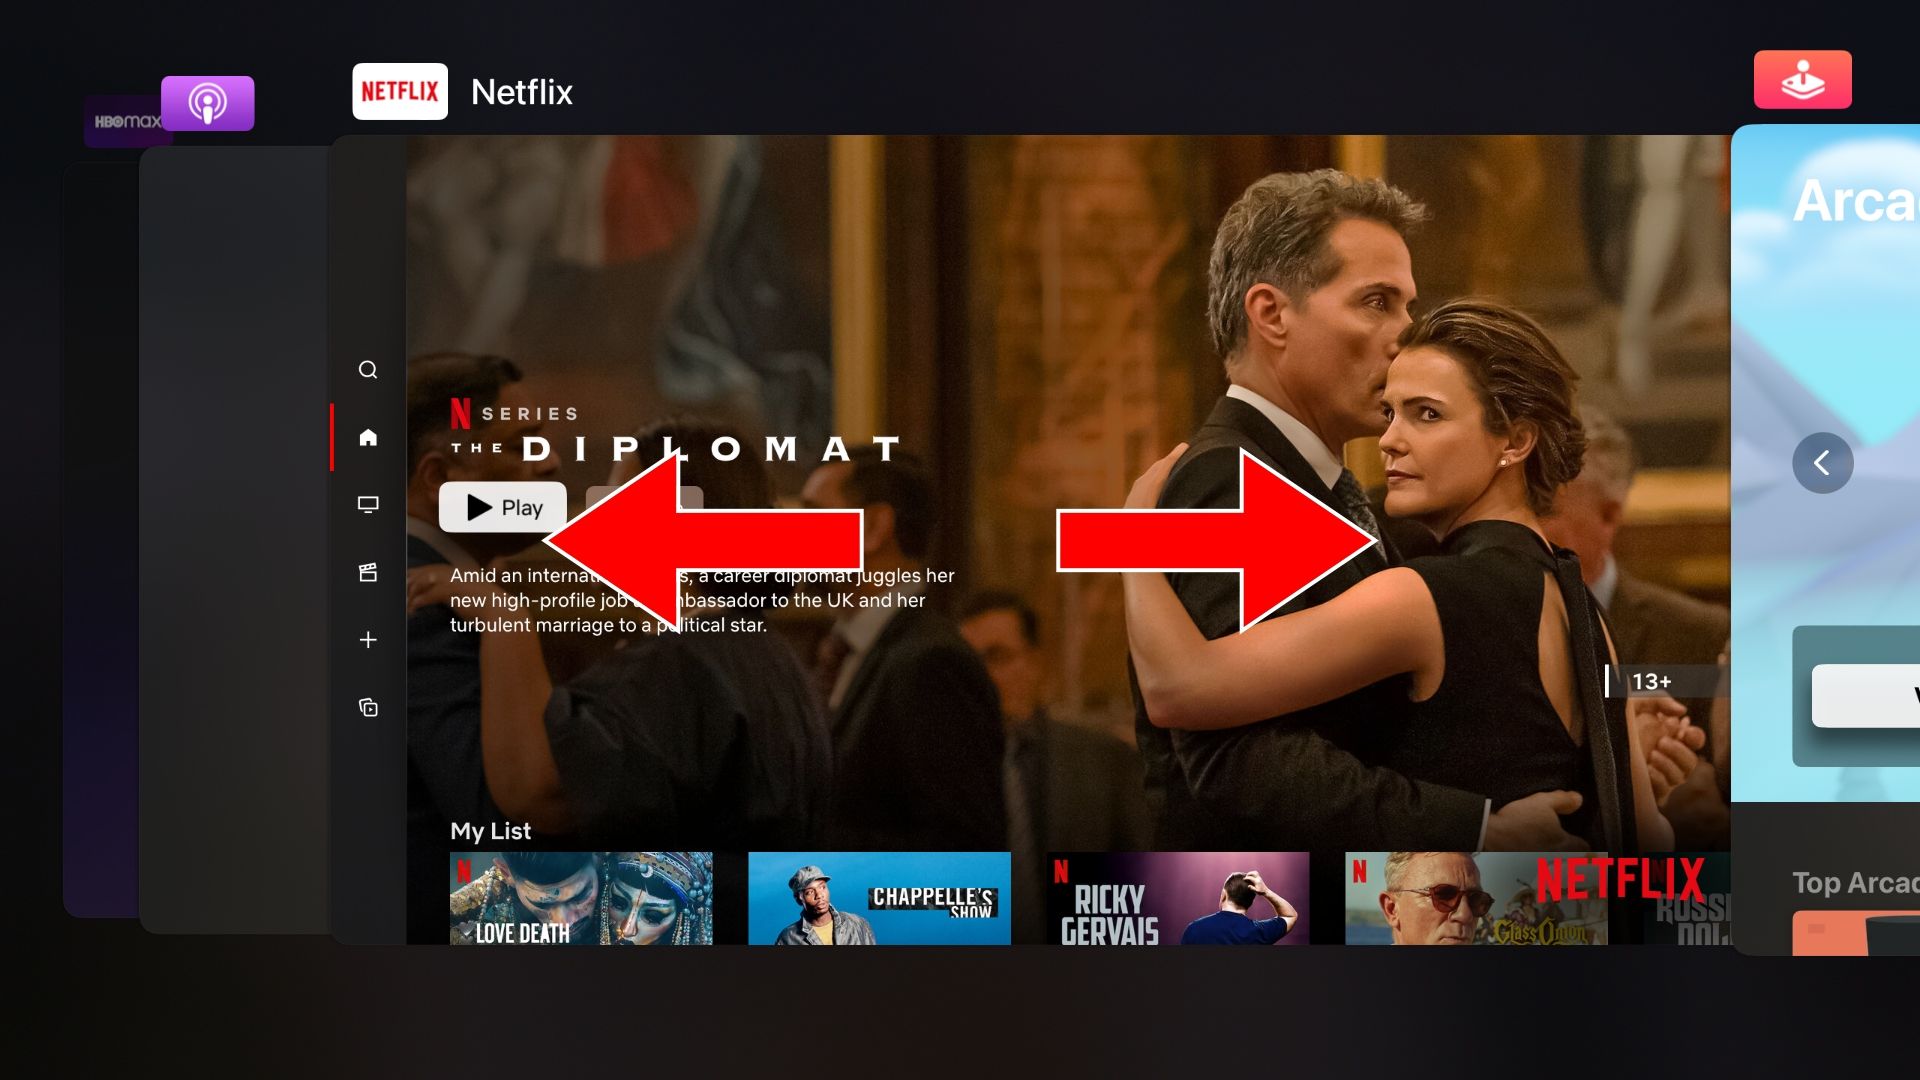 Apple TV screenshot showing tvOS app switcher with the Netflix app in the center